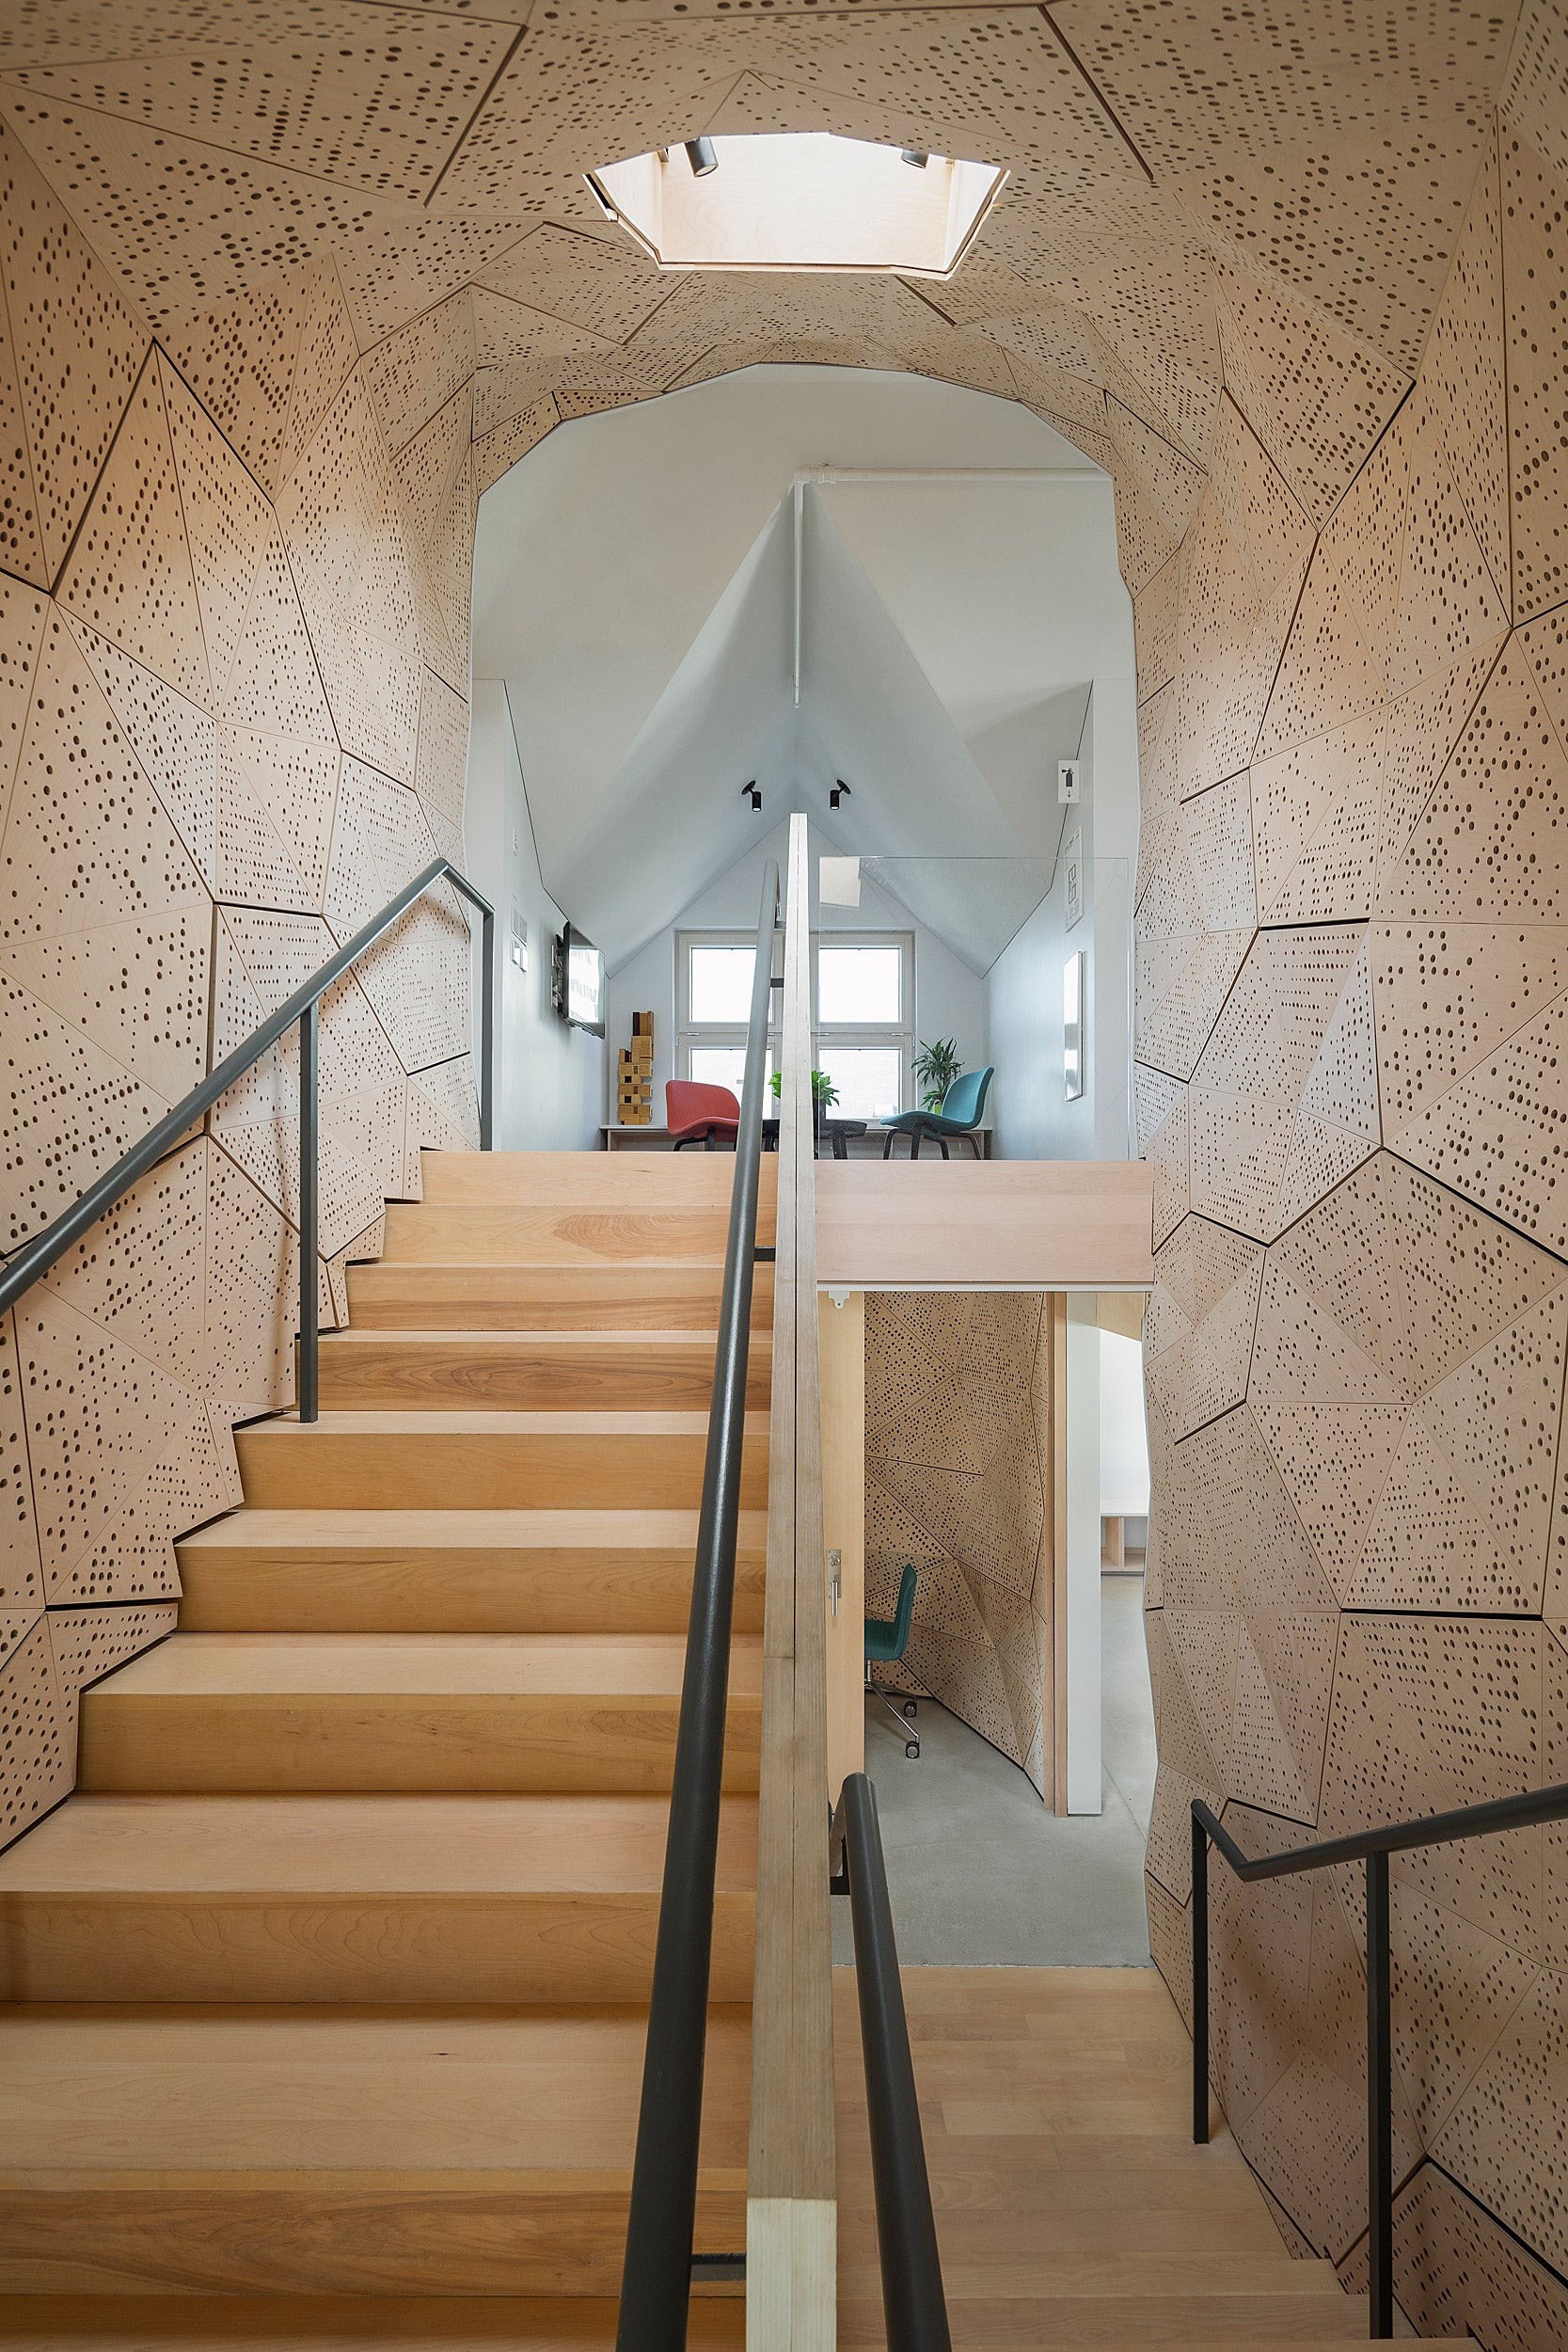 Staircase designed to reduce acoustic disturbance.